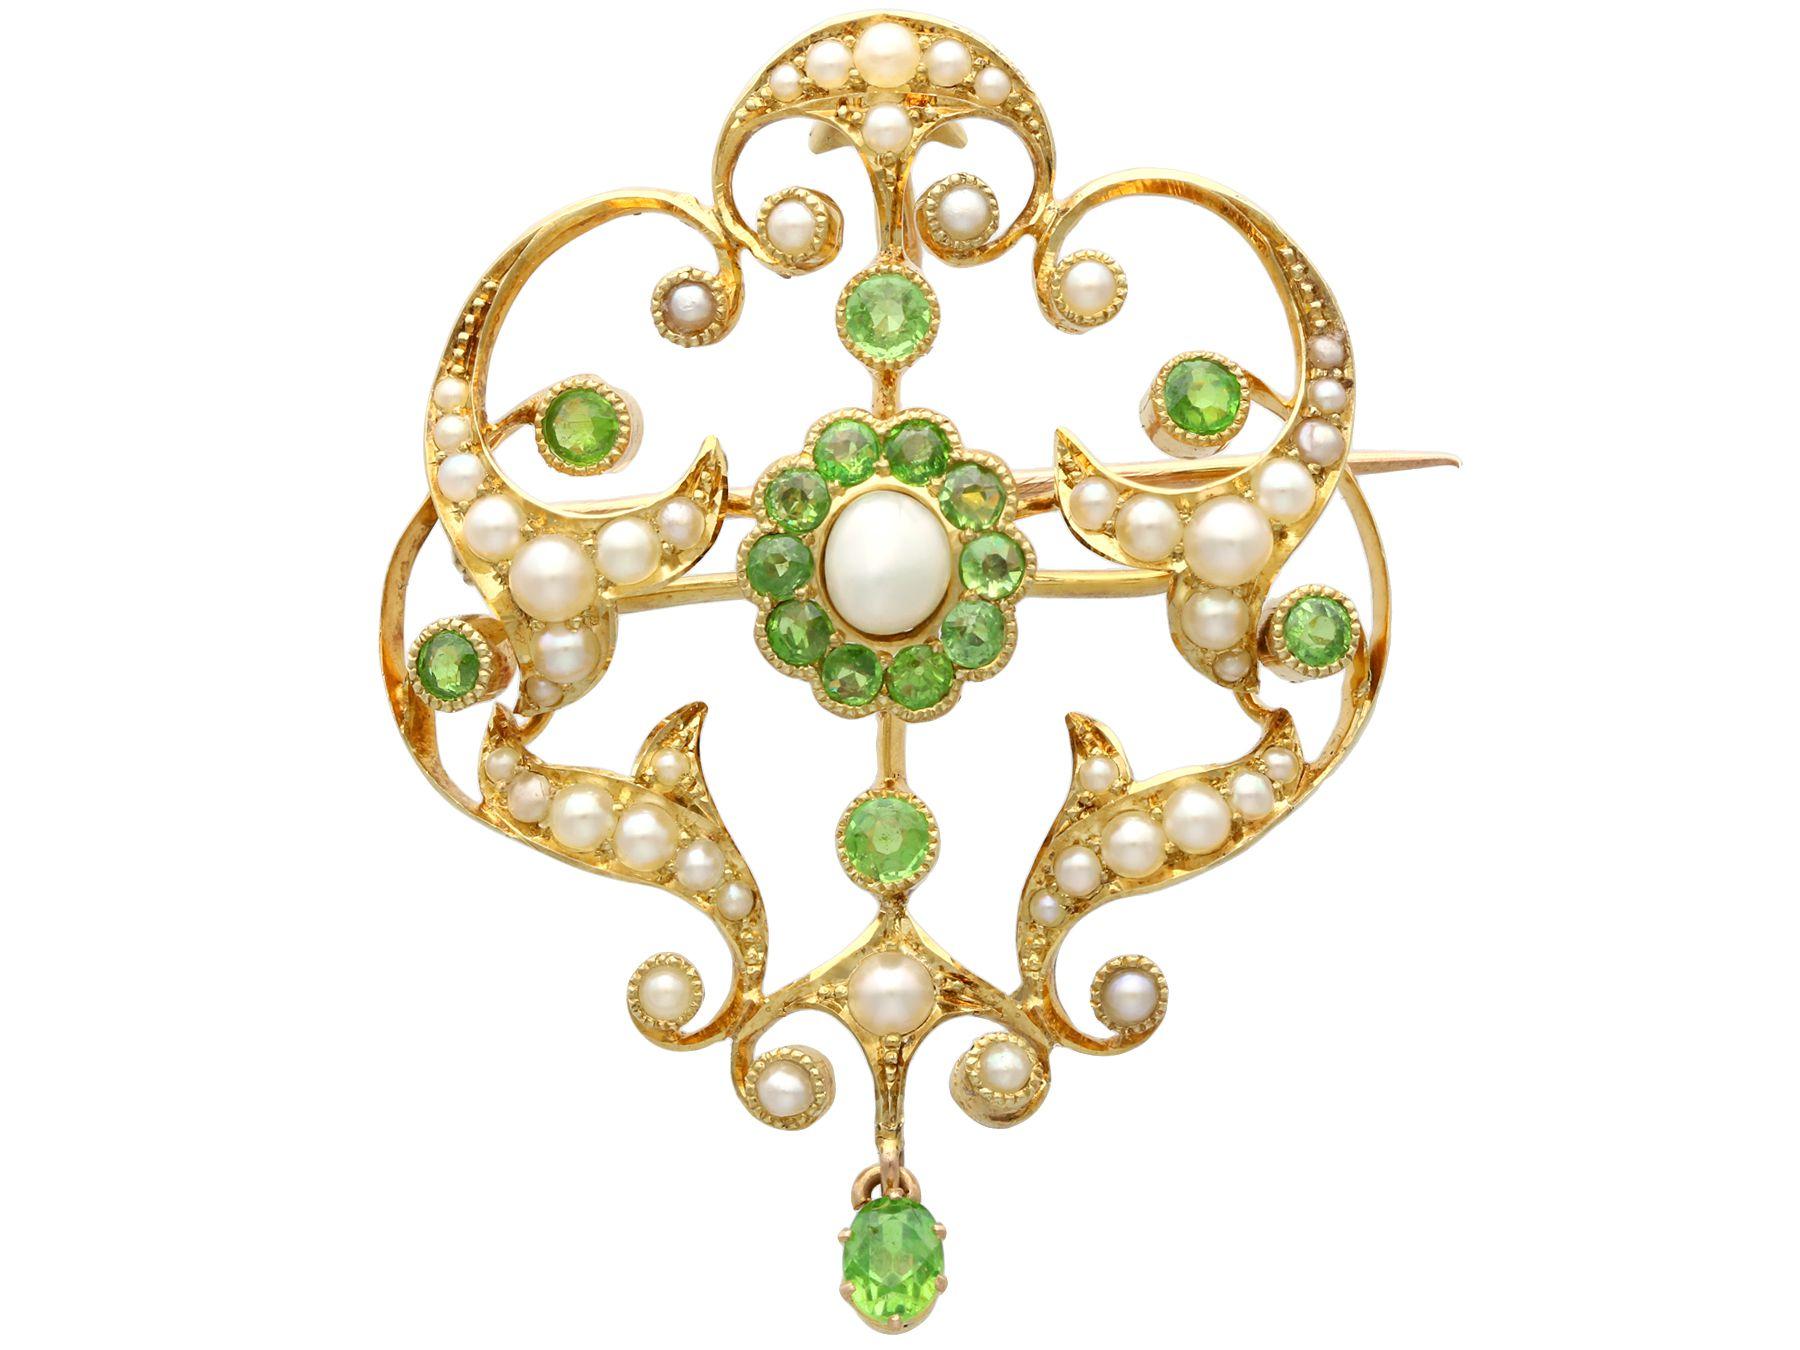 Round Cut Antique 1.19 Carat Demantoid Garnet and Seed Pearl Yellow Gold Pendant Brooch For Sale